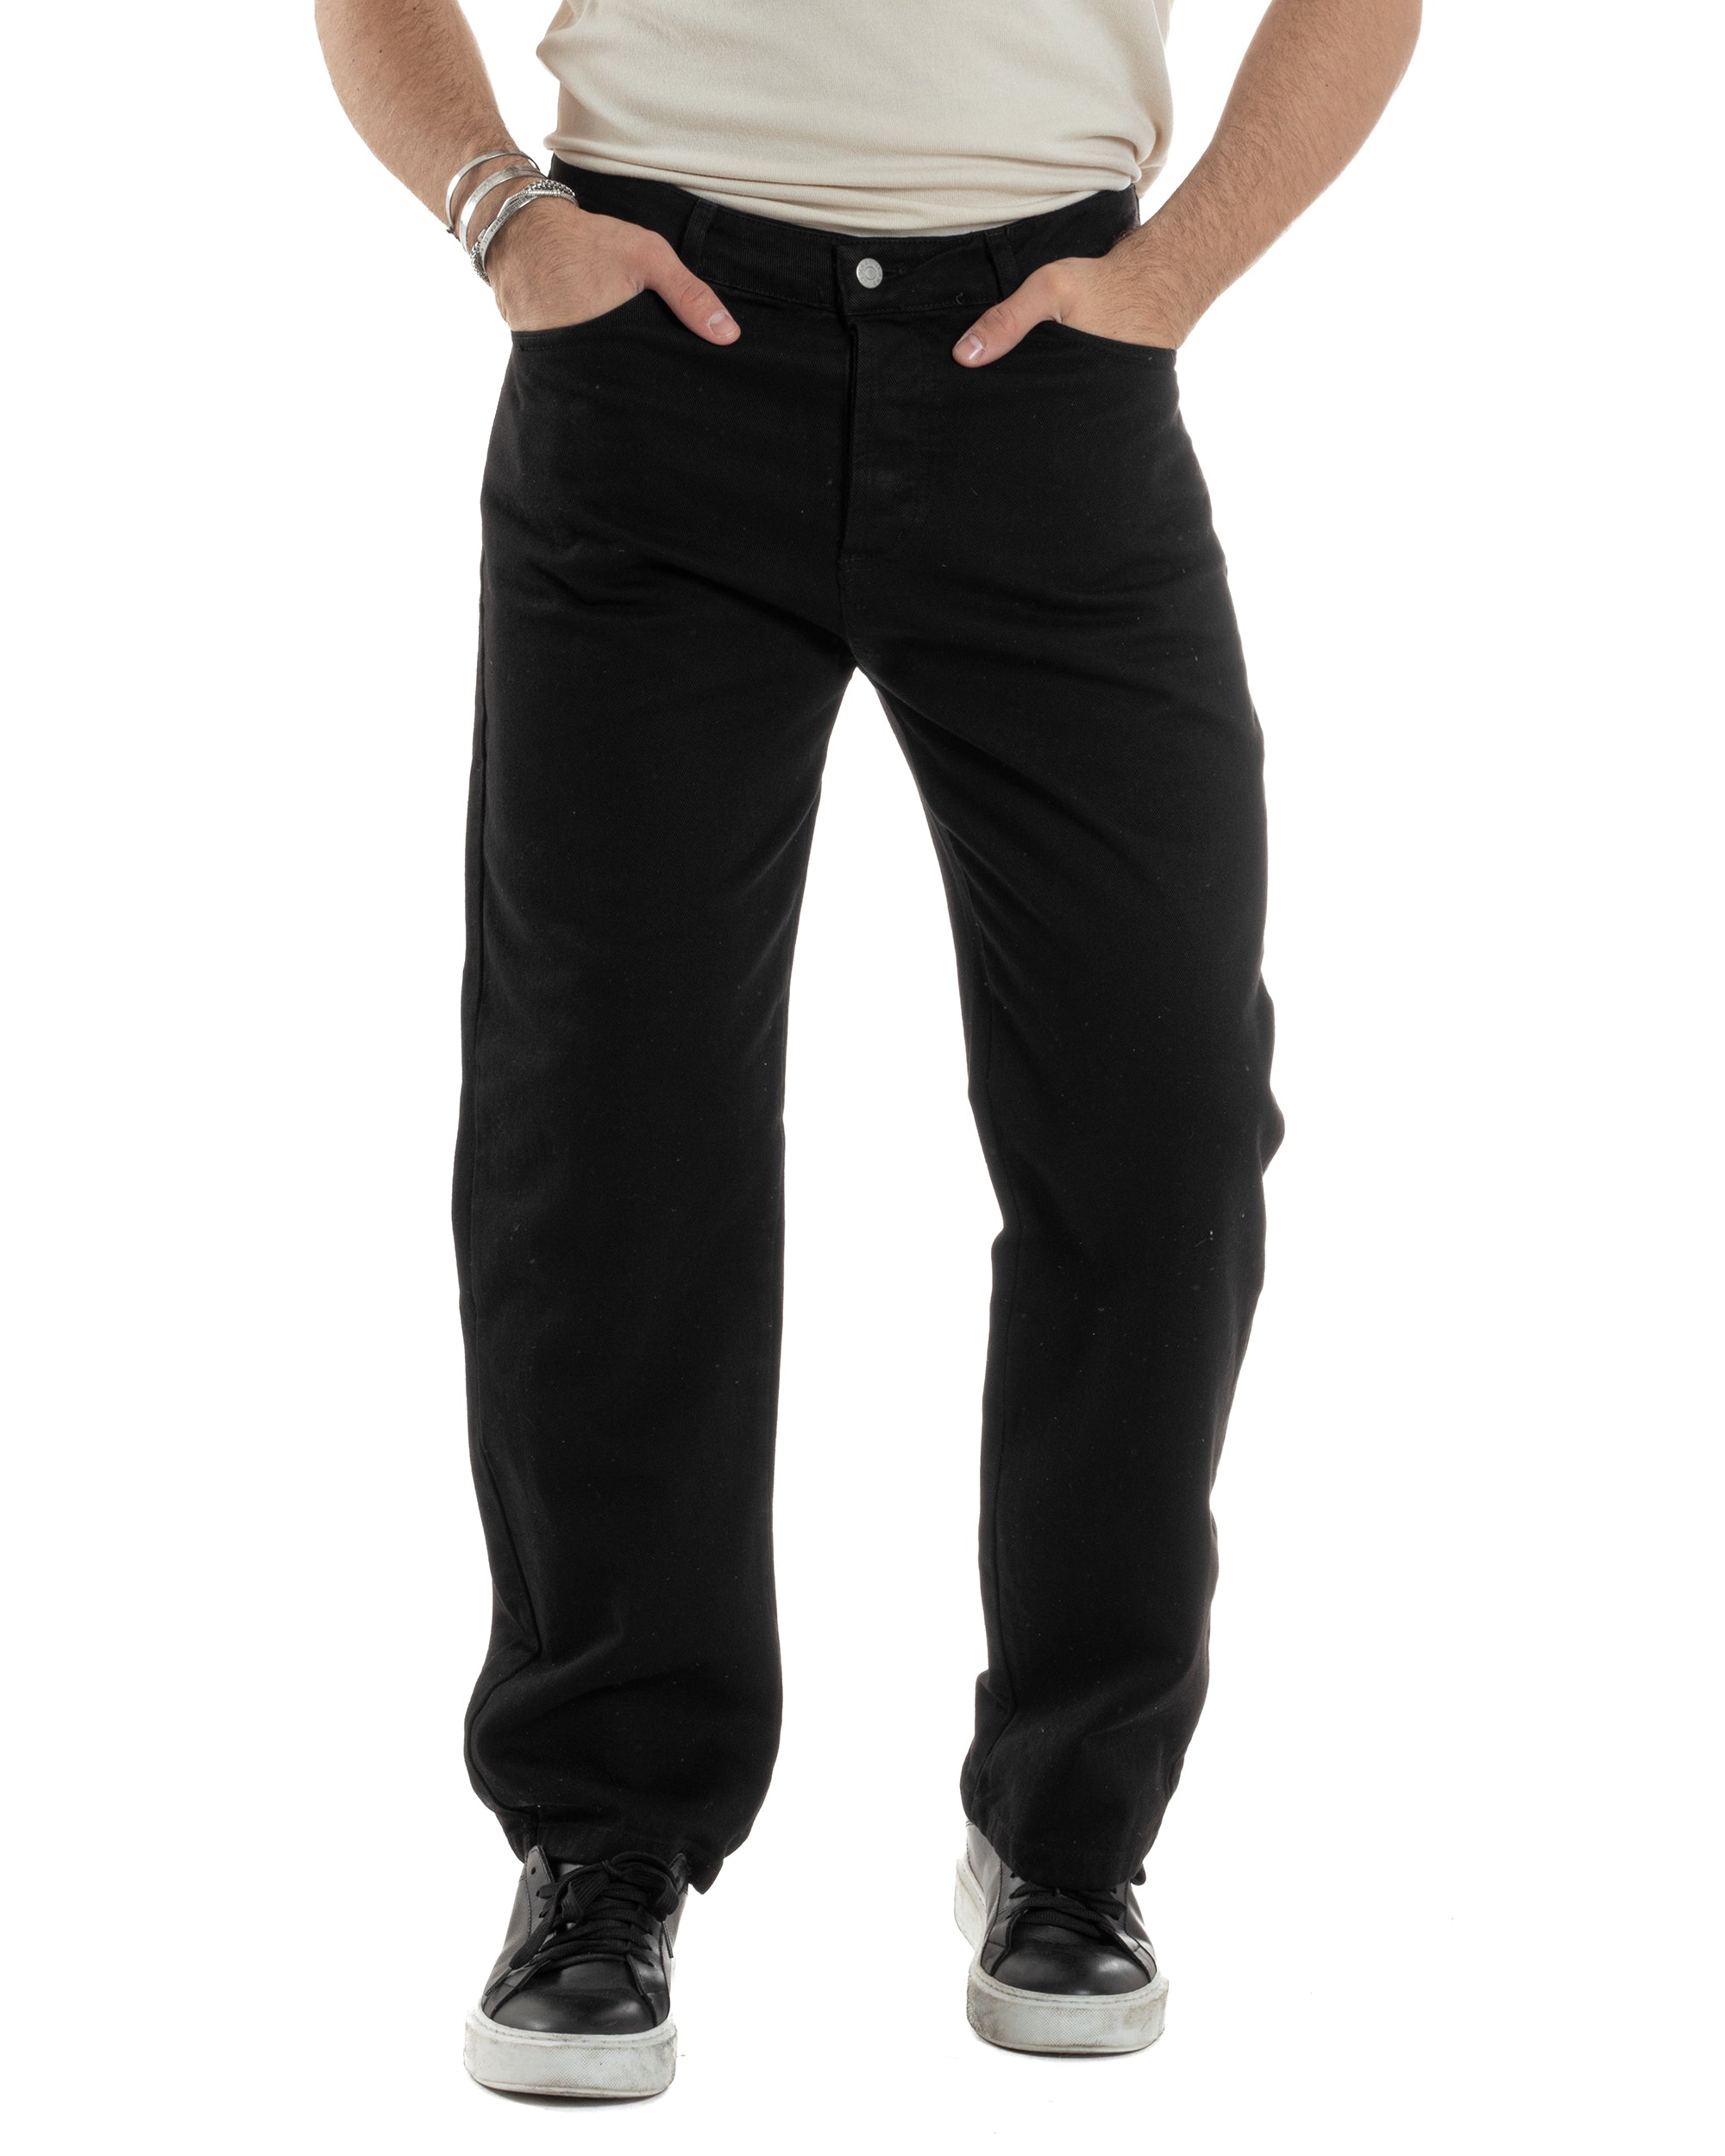 Pantaloni Uomo Jeans Straight Fit Baggy Basic Cinque Tasche Nero GIOSAL-JS1038A